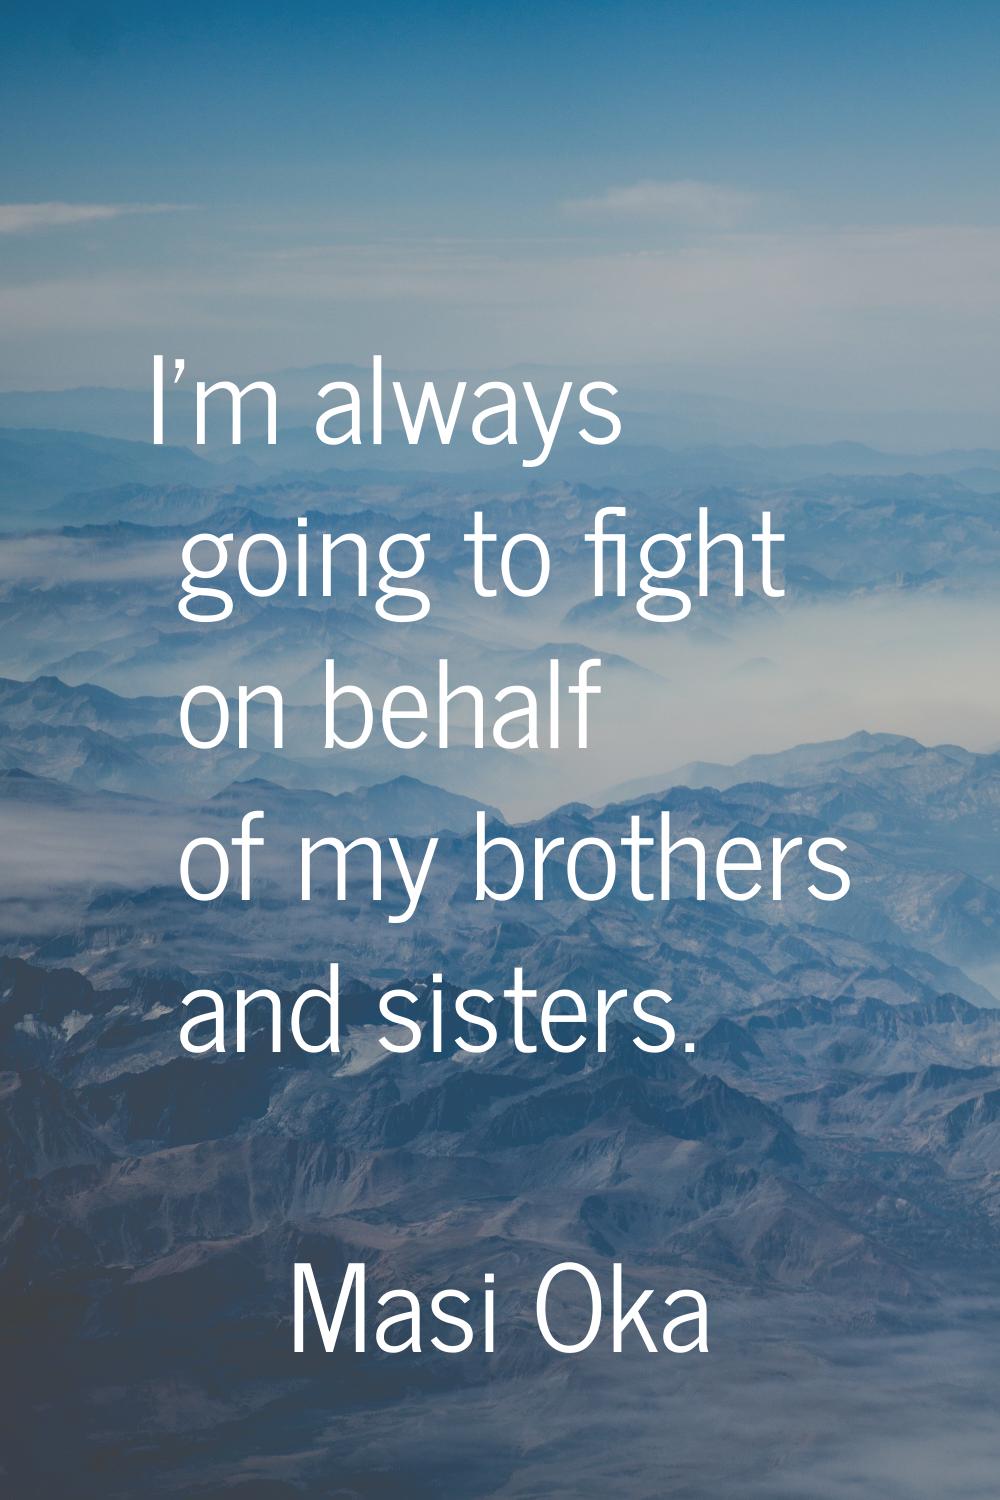 I'm always going to fight on behalf of my brothers and sisters.